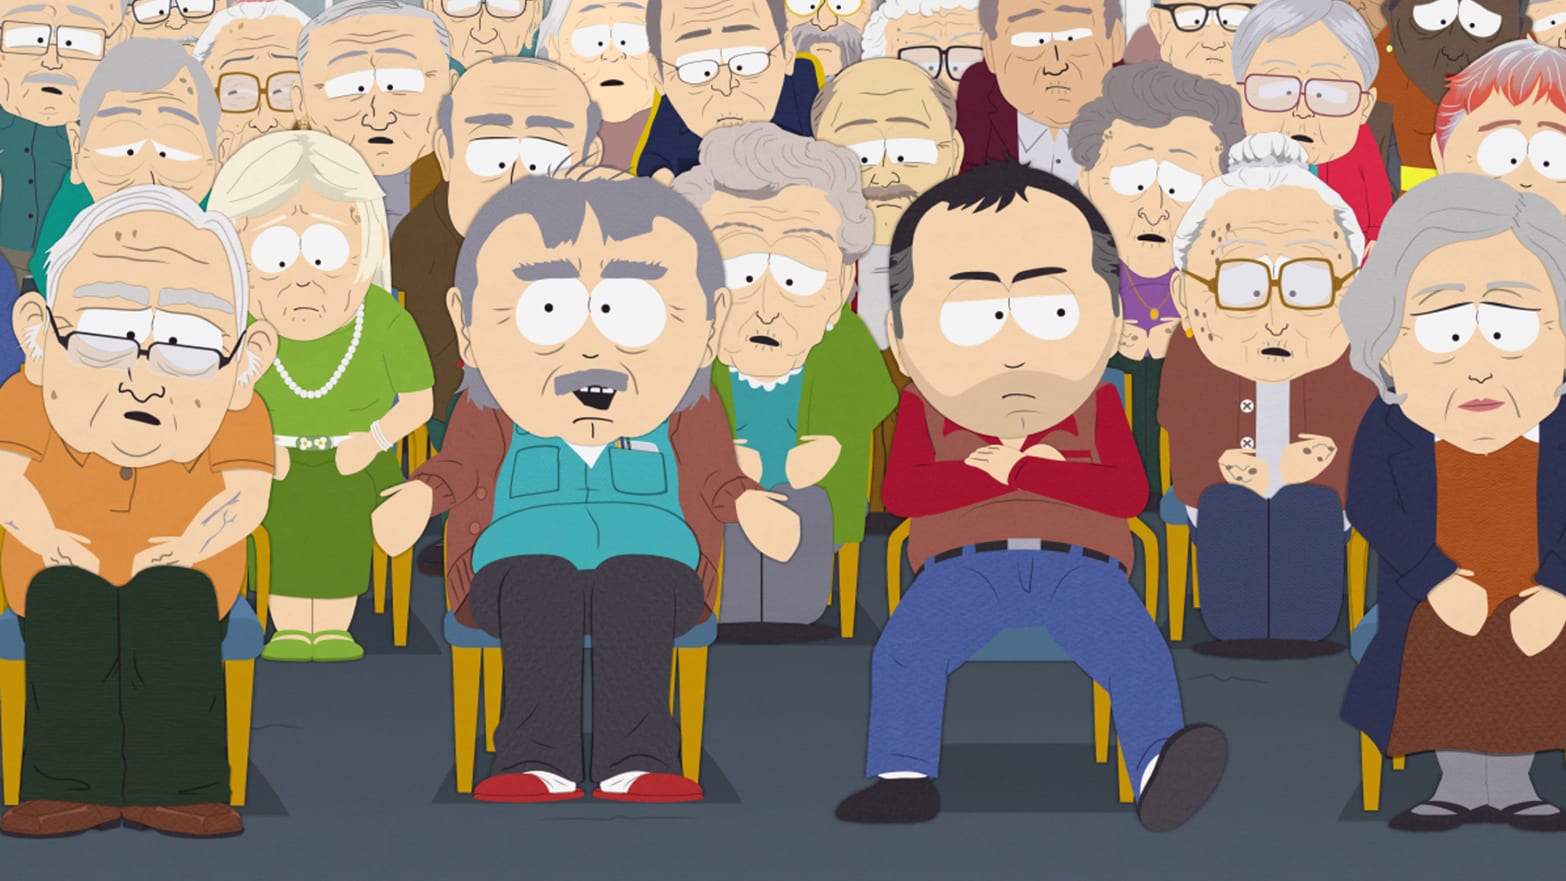 South Park tackling COVID-19 with hourlong episode